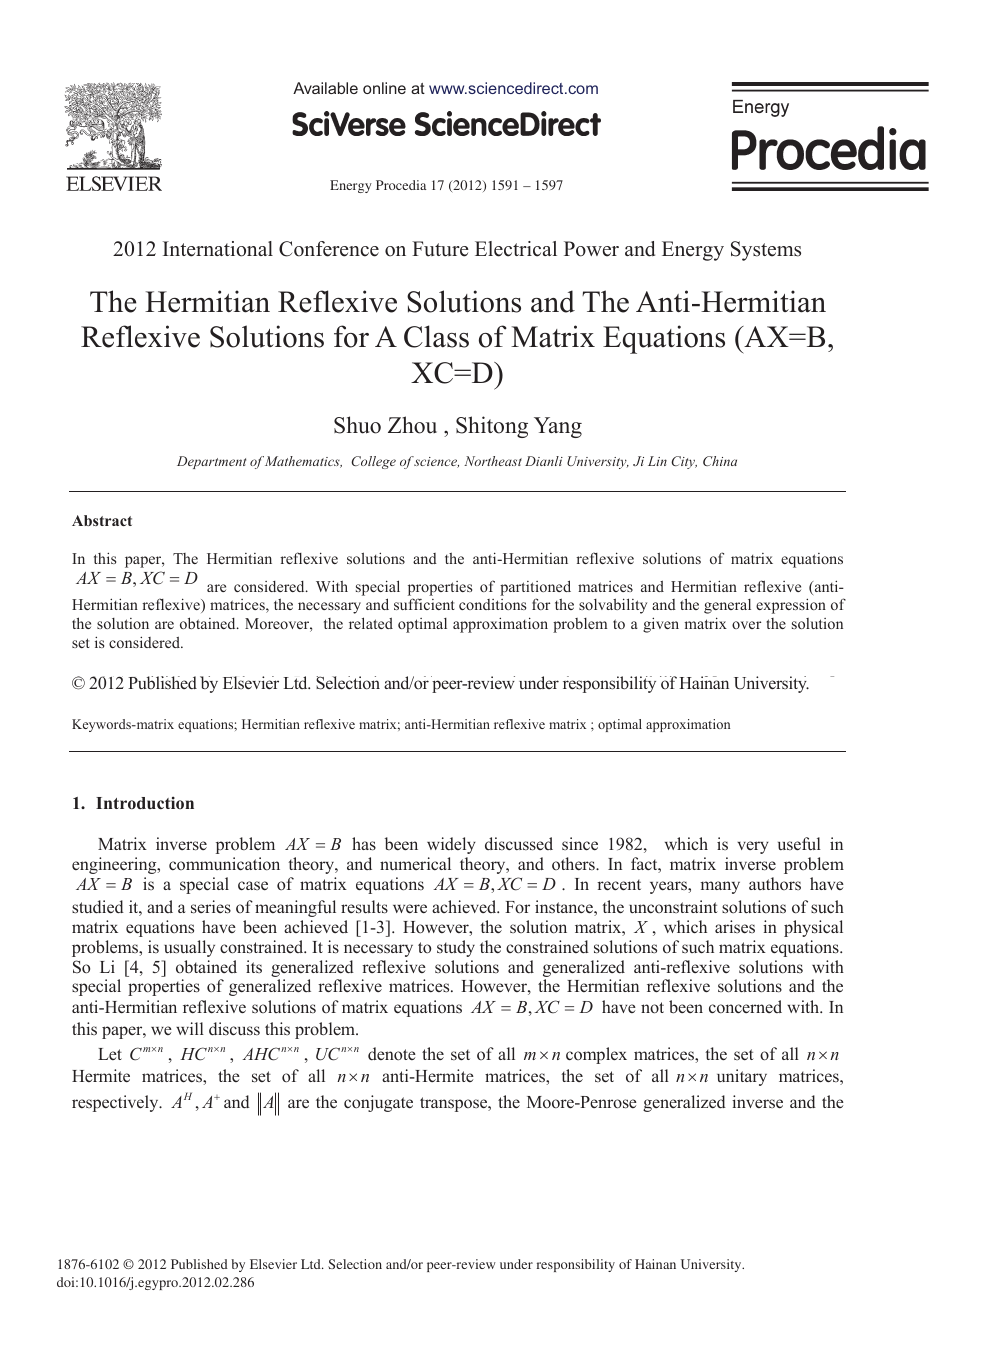 The Hermitian Reflexive Solutions And The Anti Hermitian Reflexive Solutions For A Class Of Matrix Equations Ax B Xc D Topic Of Research Paper In Mathematics Download Scholarly Article Pdf And Read For Free